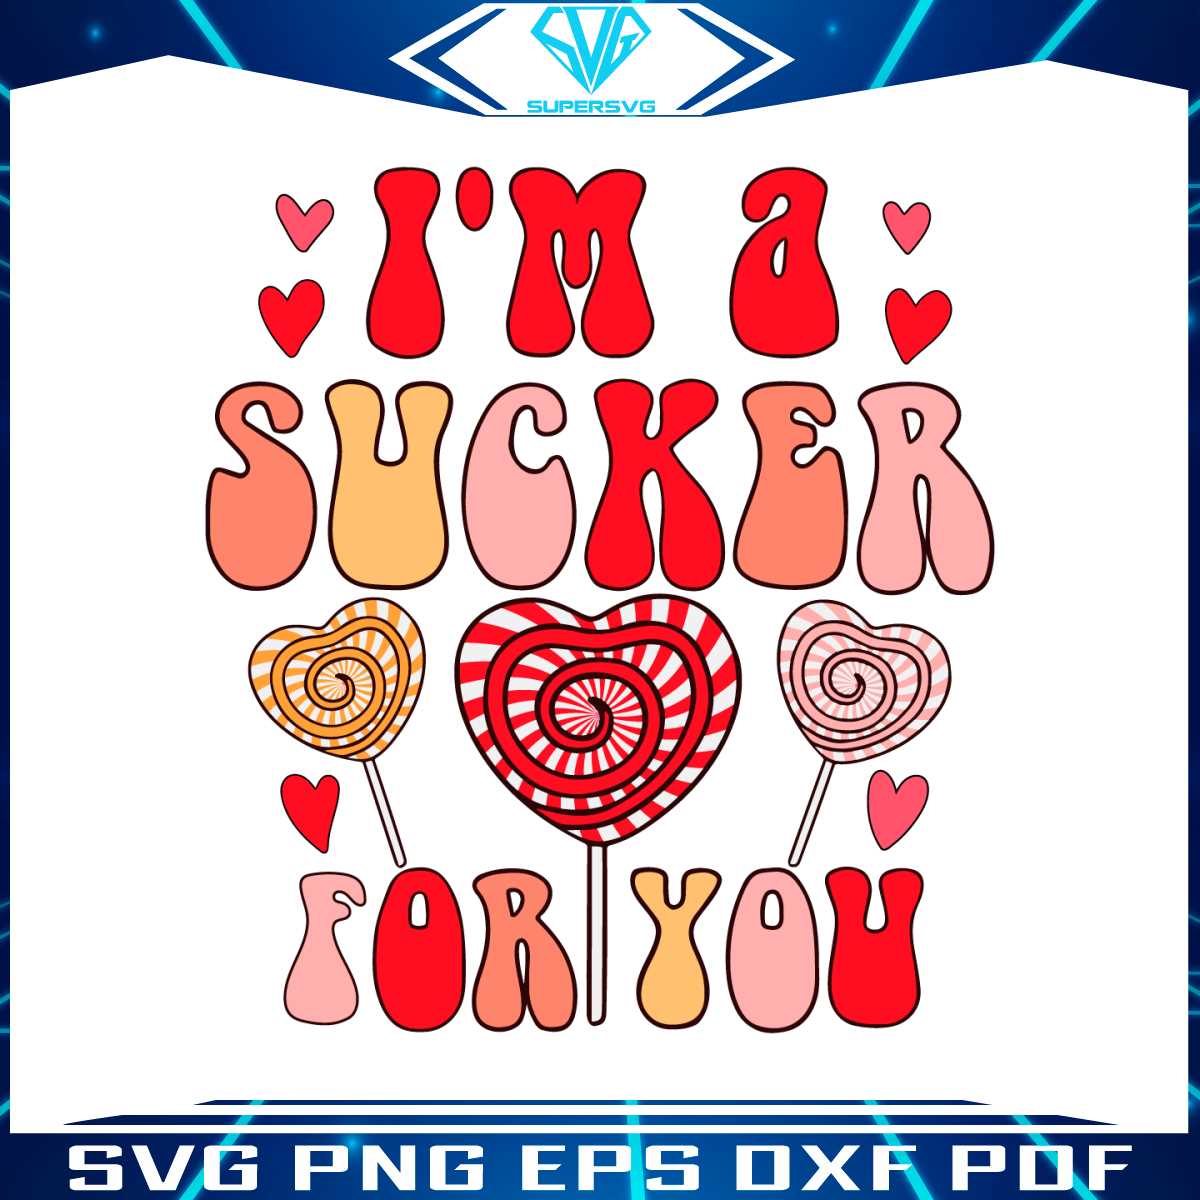 im-a-sucker-for-you-awesome-heart-lollipop-svg